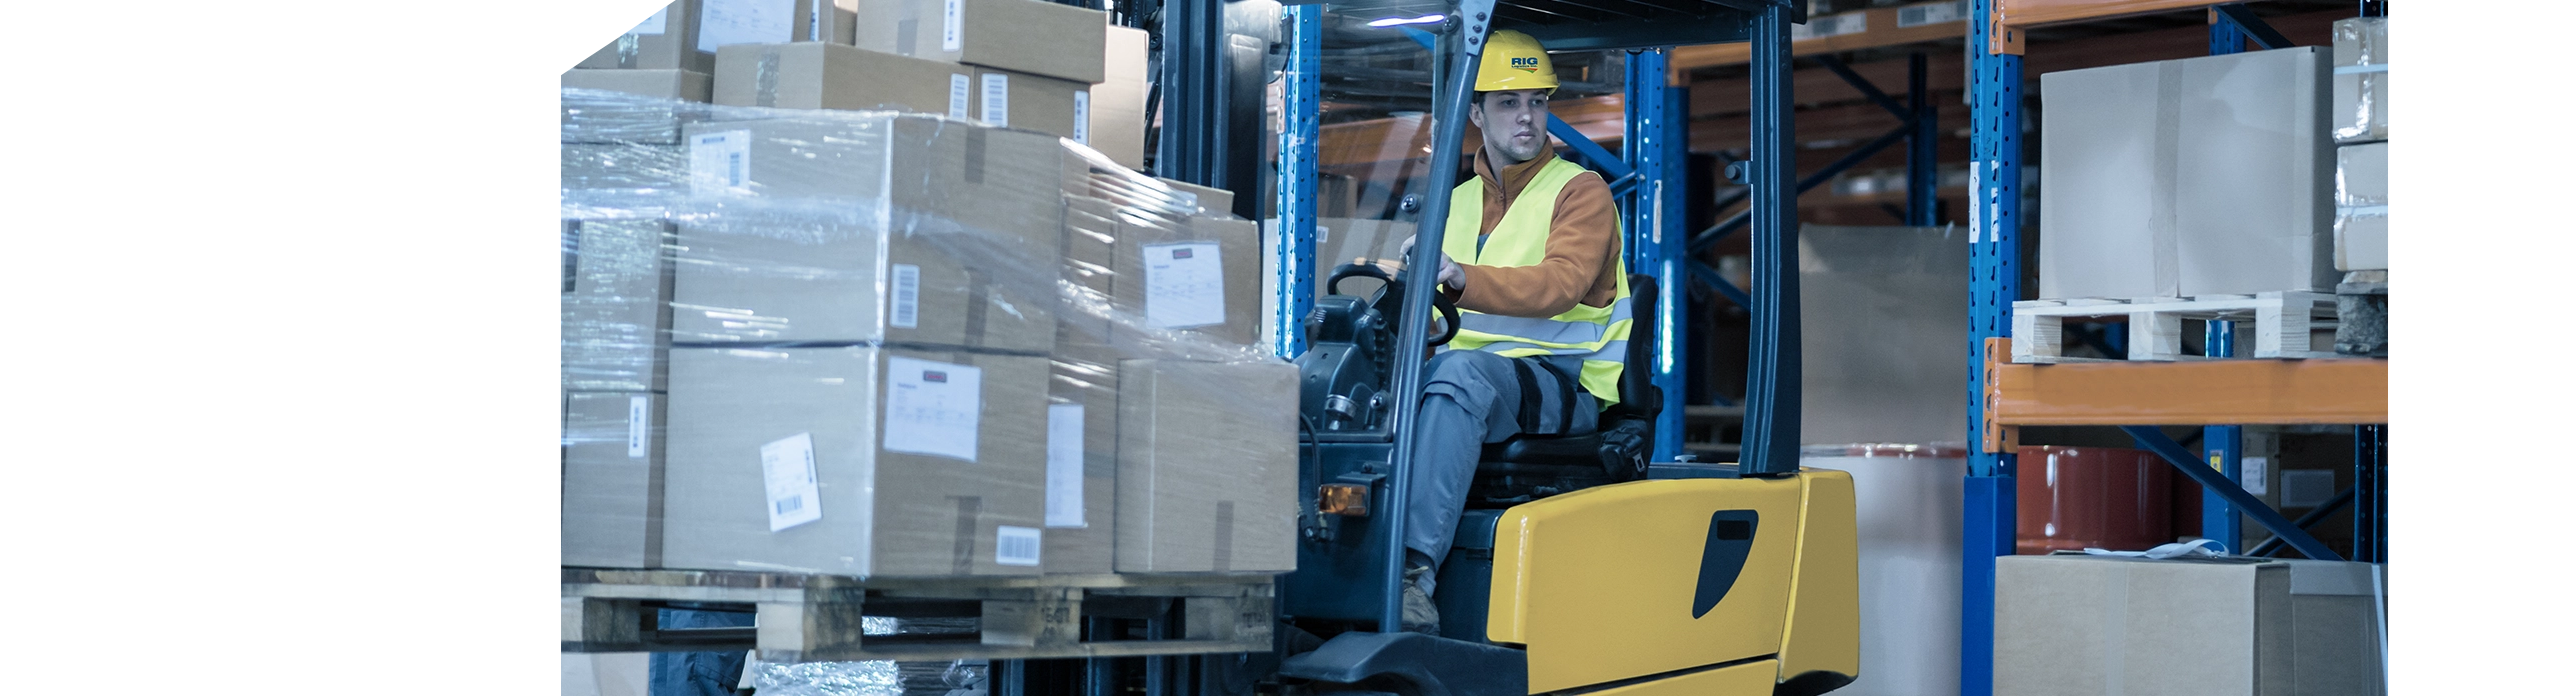 RIG Logistics warehousing employee operating forklift with pallet of packages